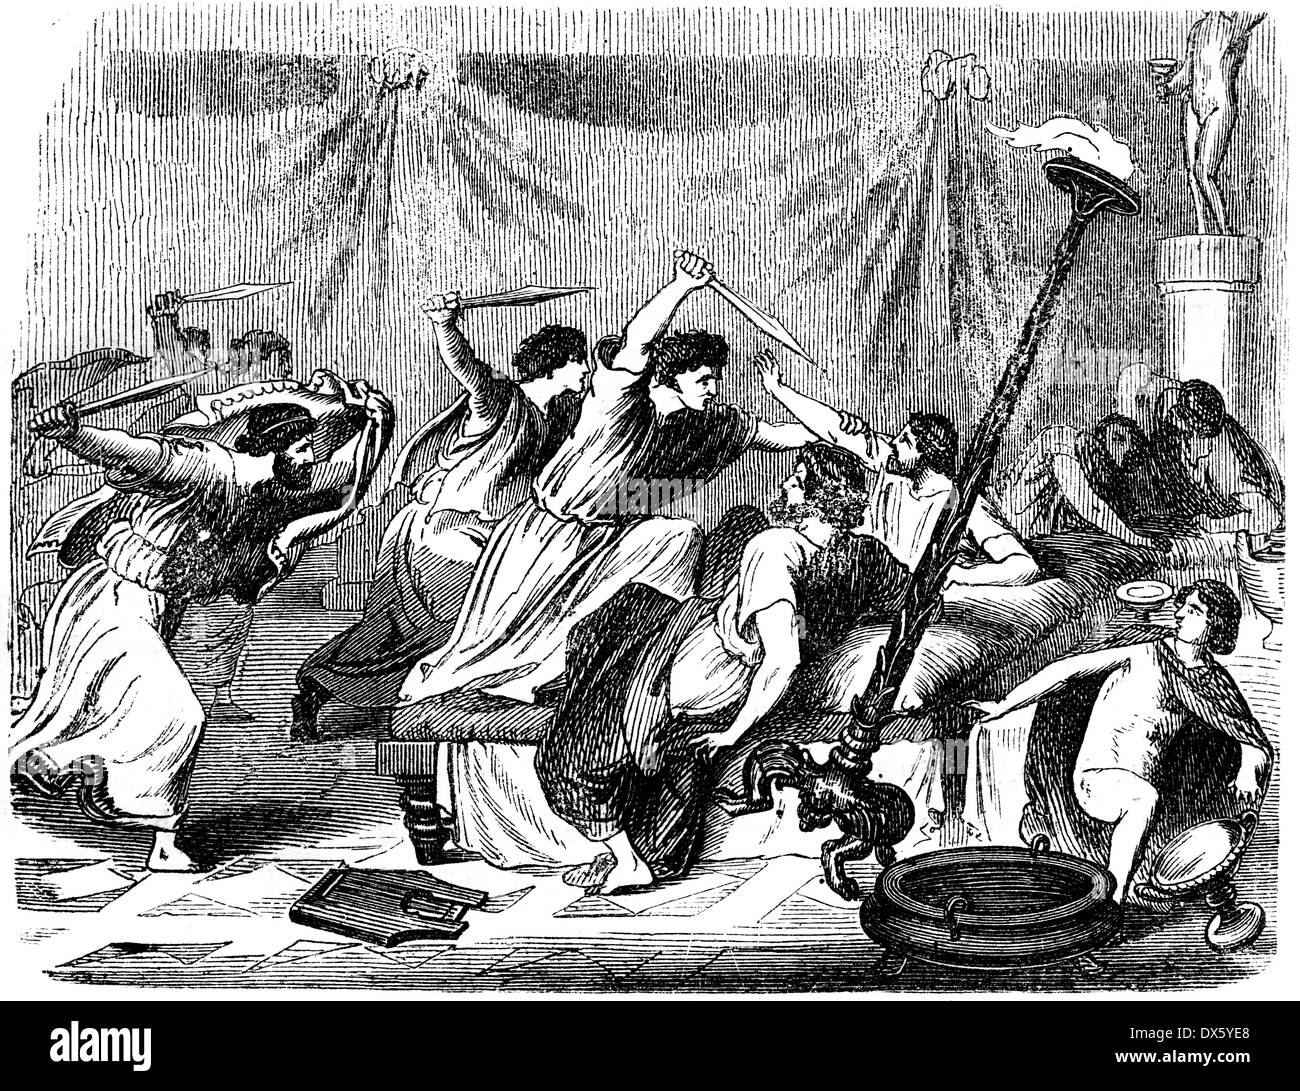 Pelopidas and assassination of tyrant, Thebes, Greece, illustration from book dated 1878 Stock Photo